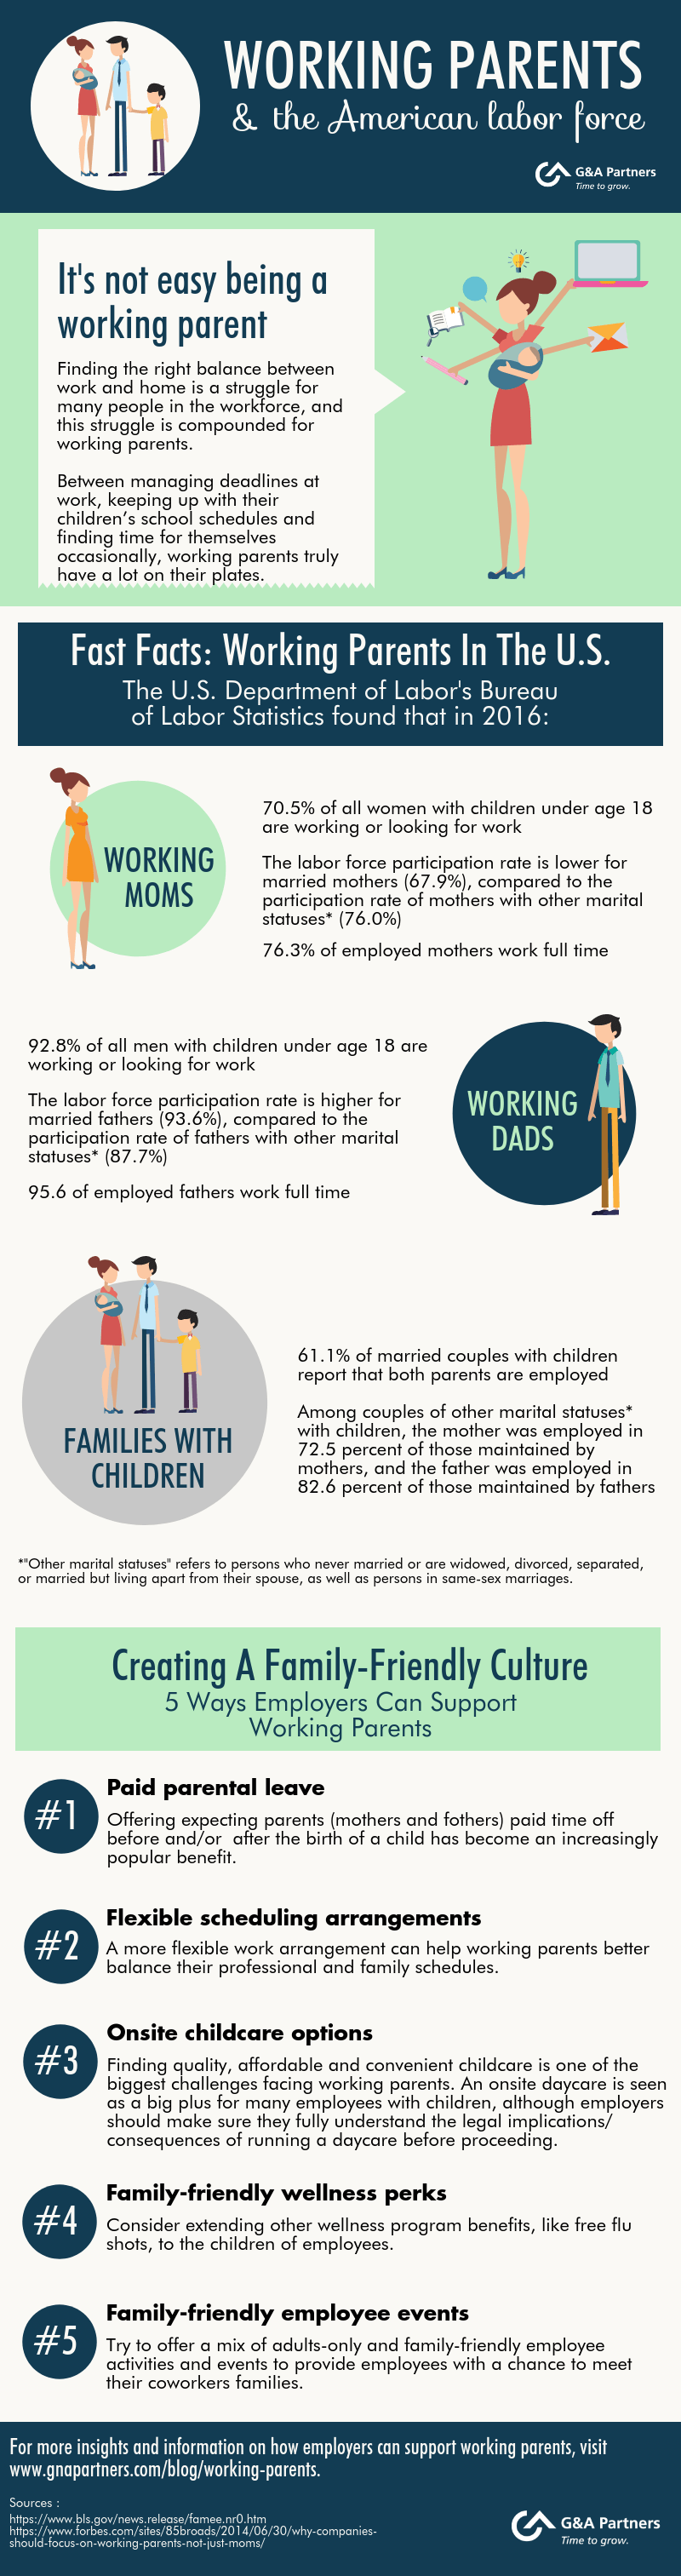 Working Parents & The American Workforce